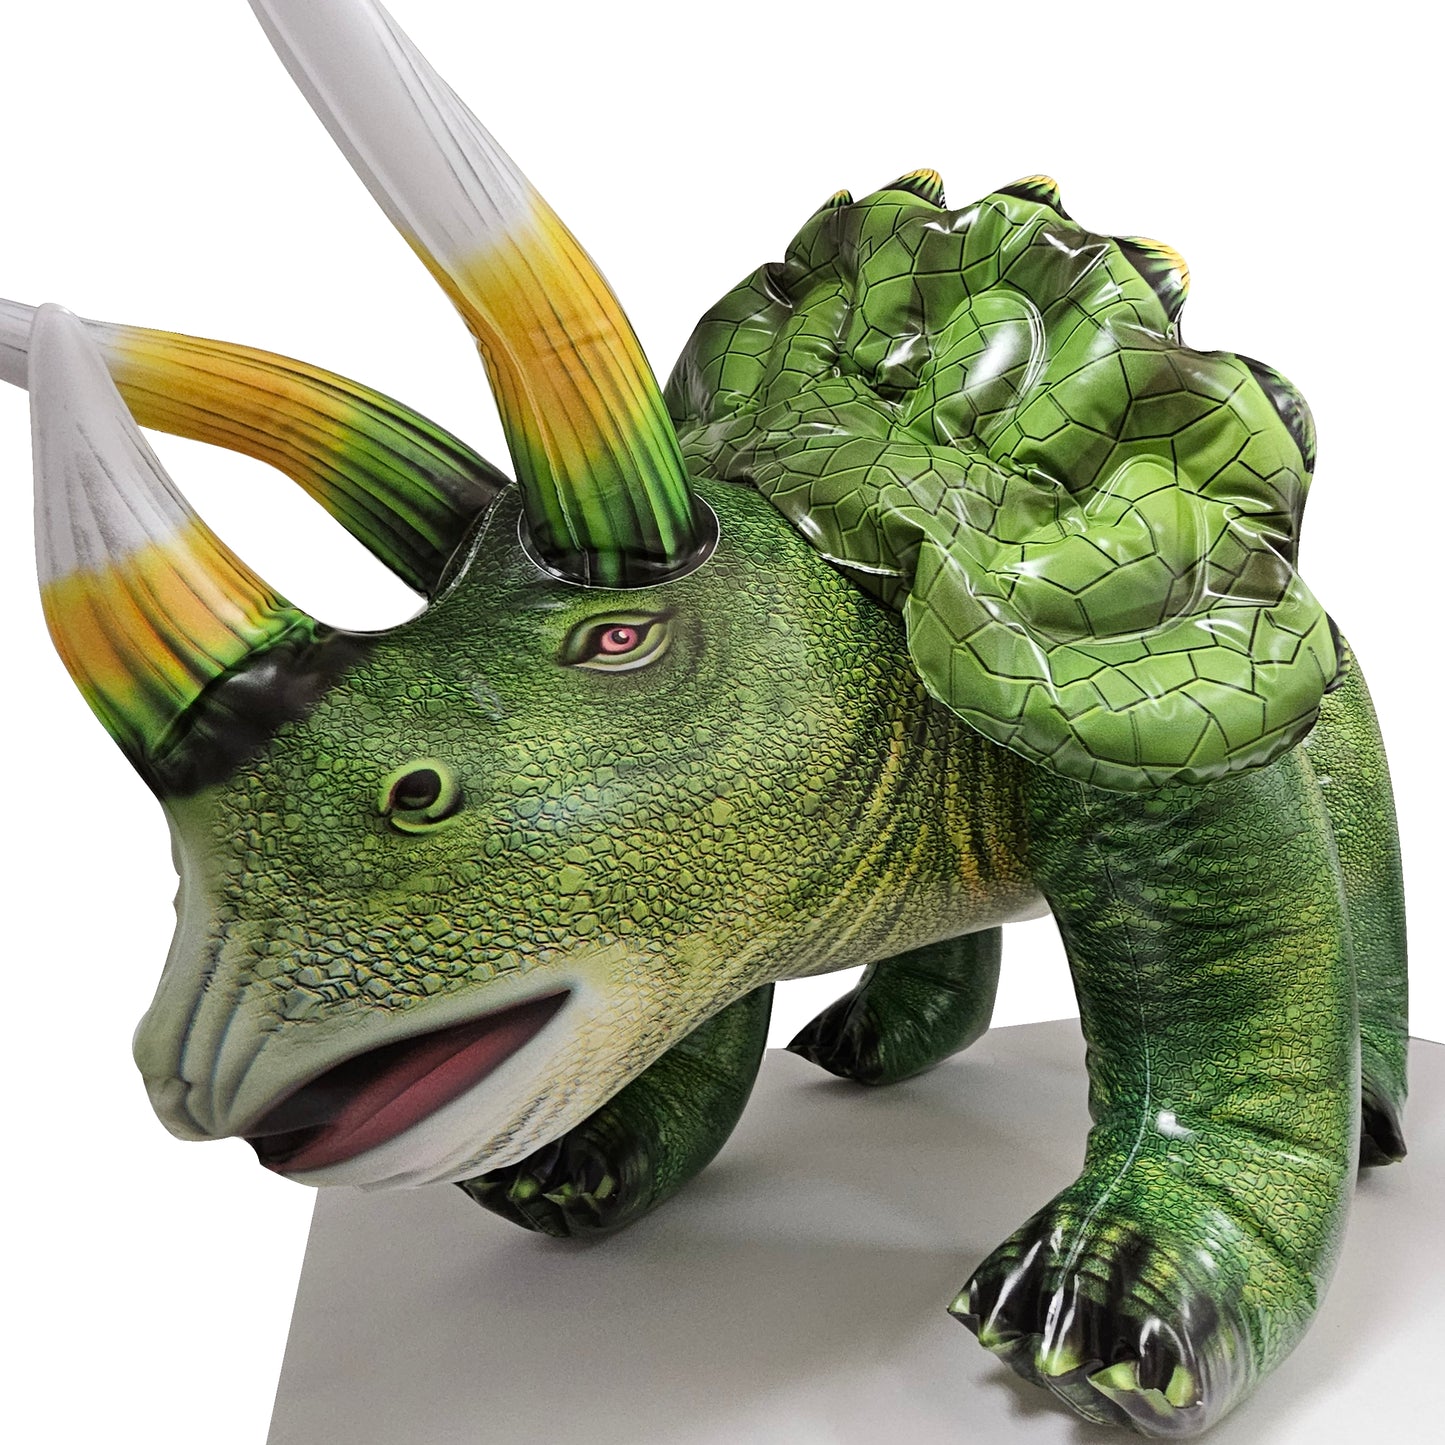 Jet Creations Triceratops Dinosaur Toy, Inflatable, 20"TALL/43"L